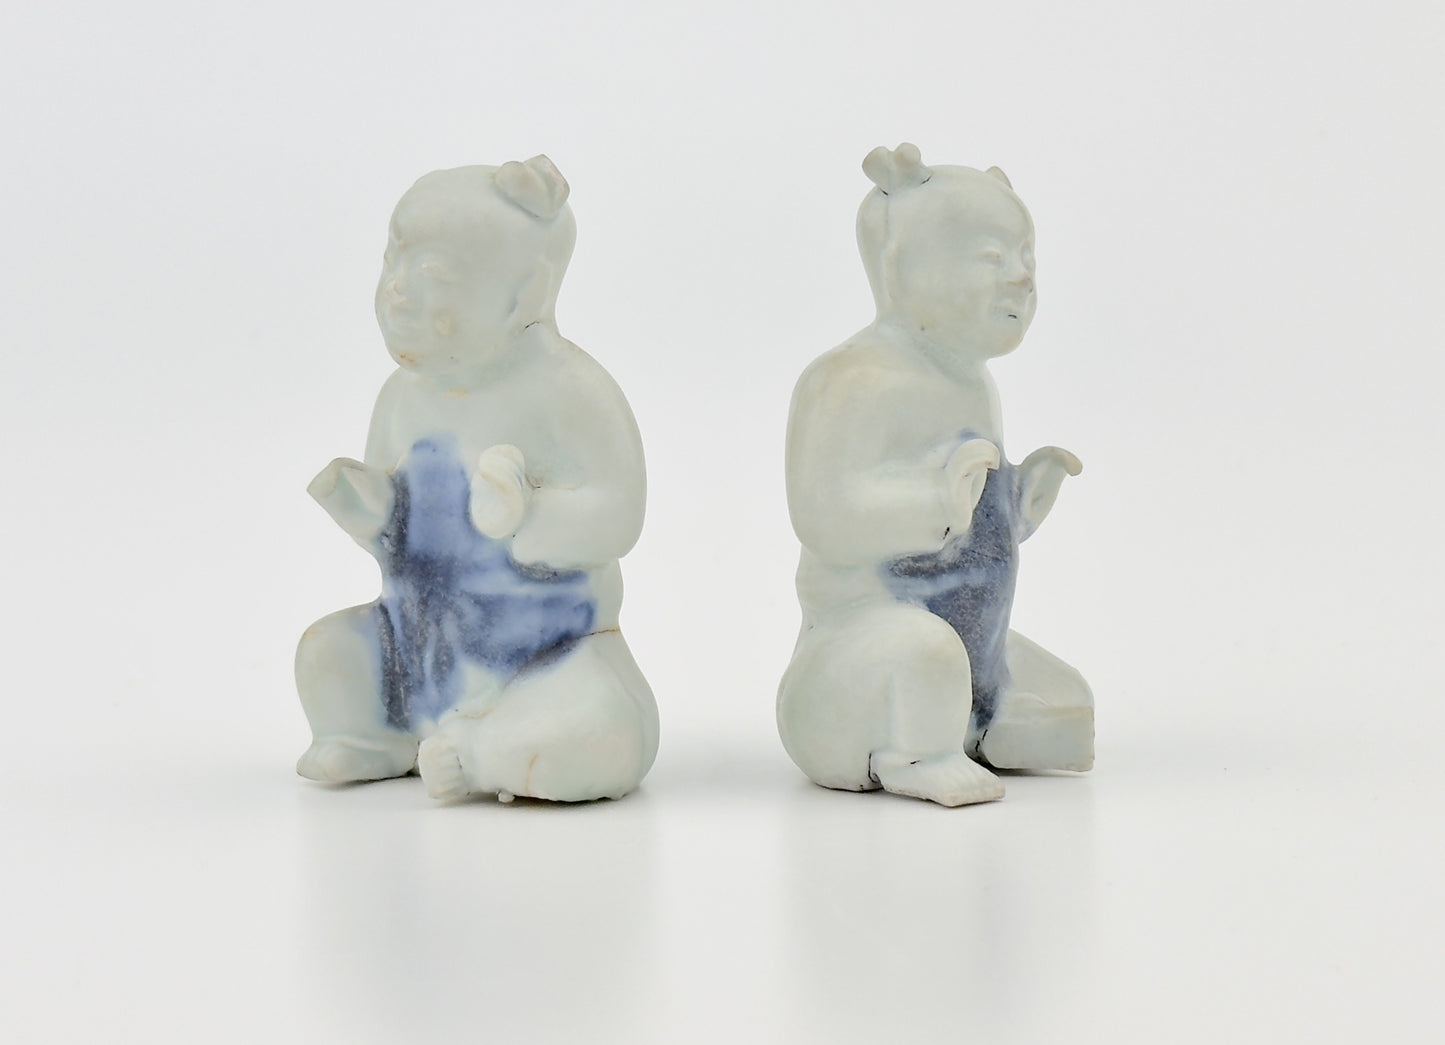 TWO FIGURINE OF SEATED BOYS, CIRCA 1725, QING DYNASTY, YONGZHENG REIGN